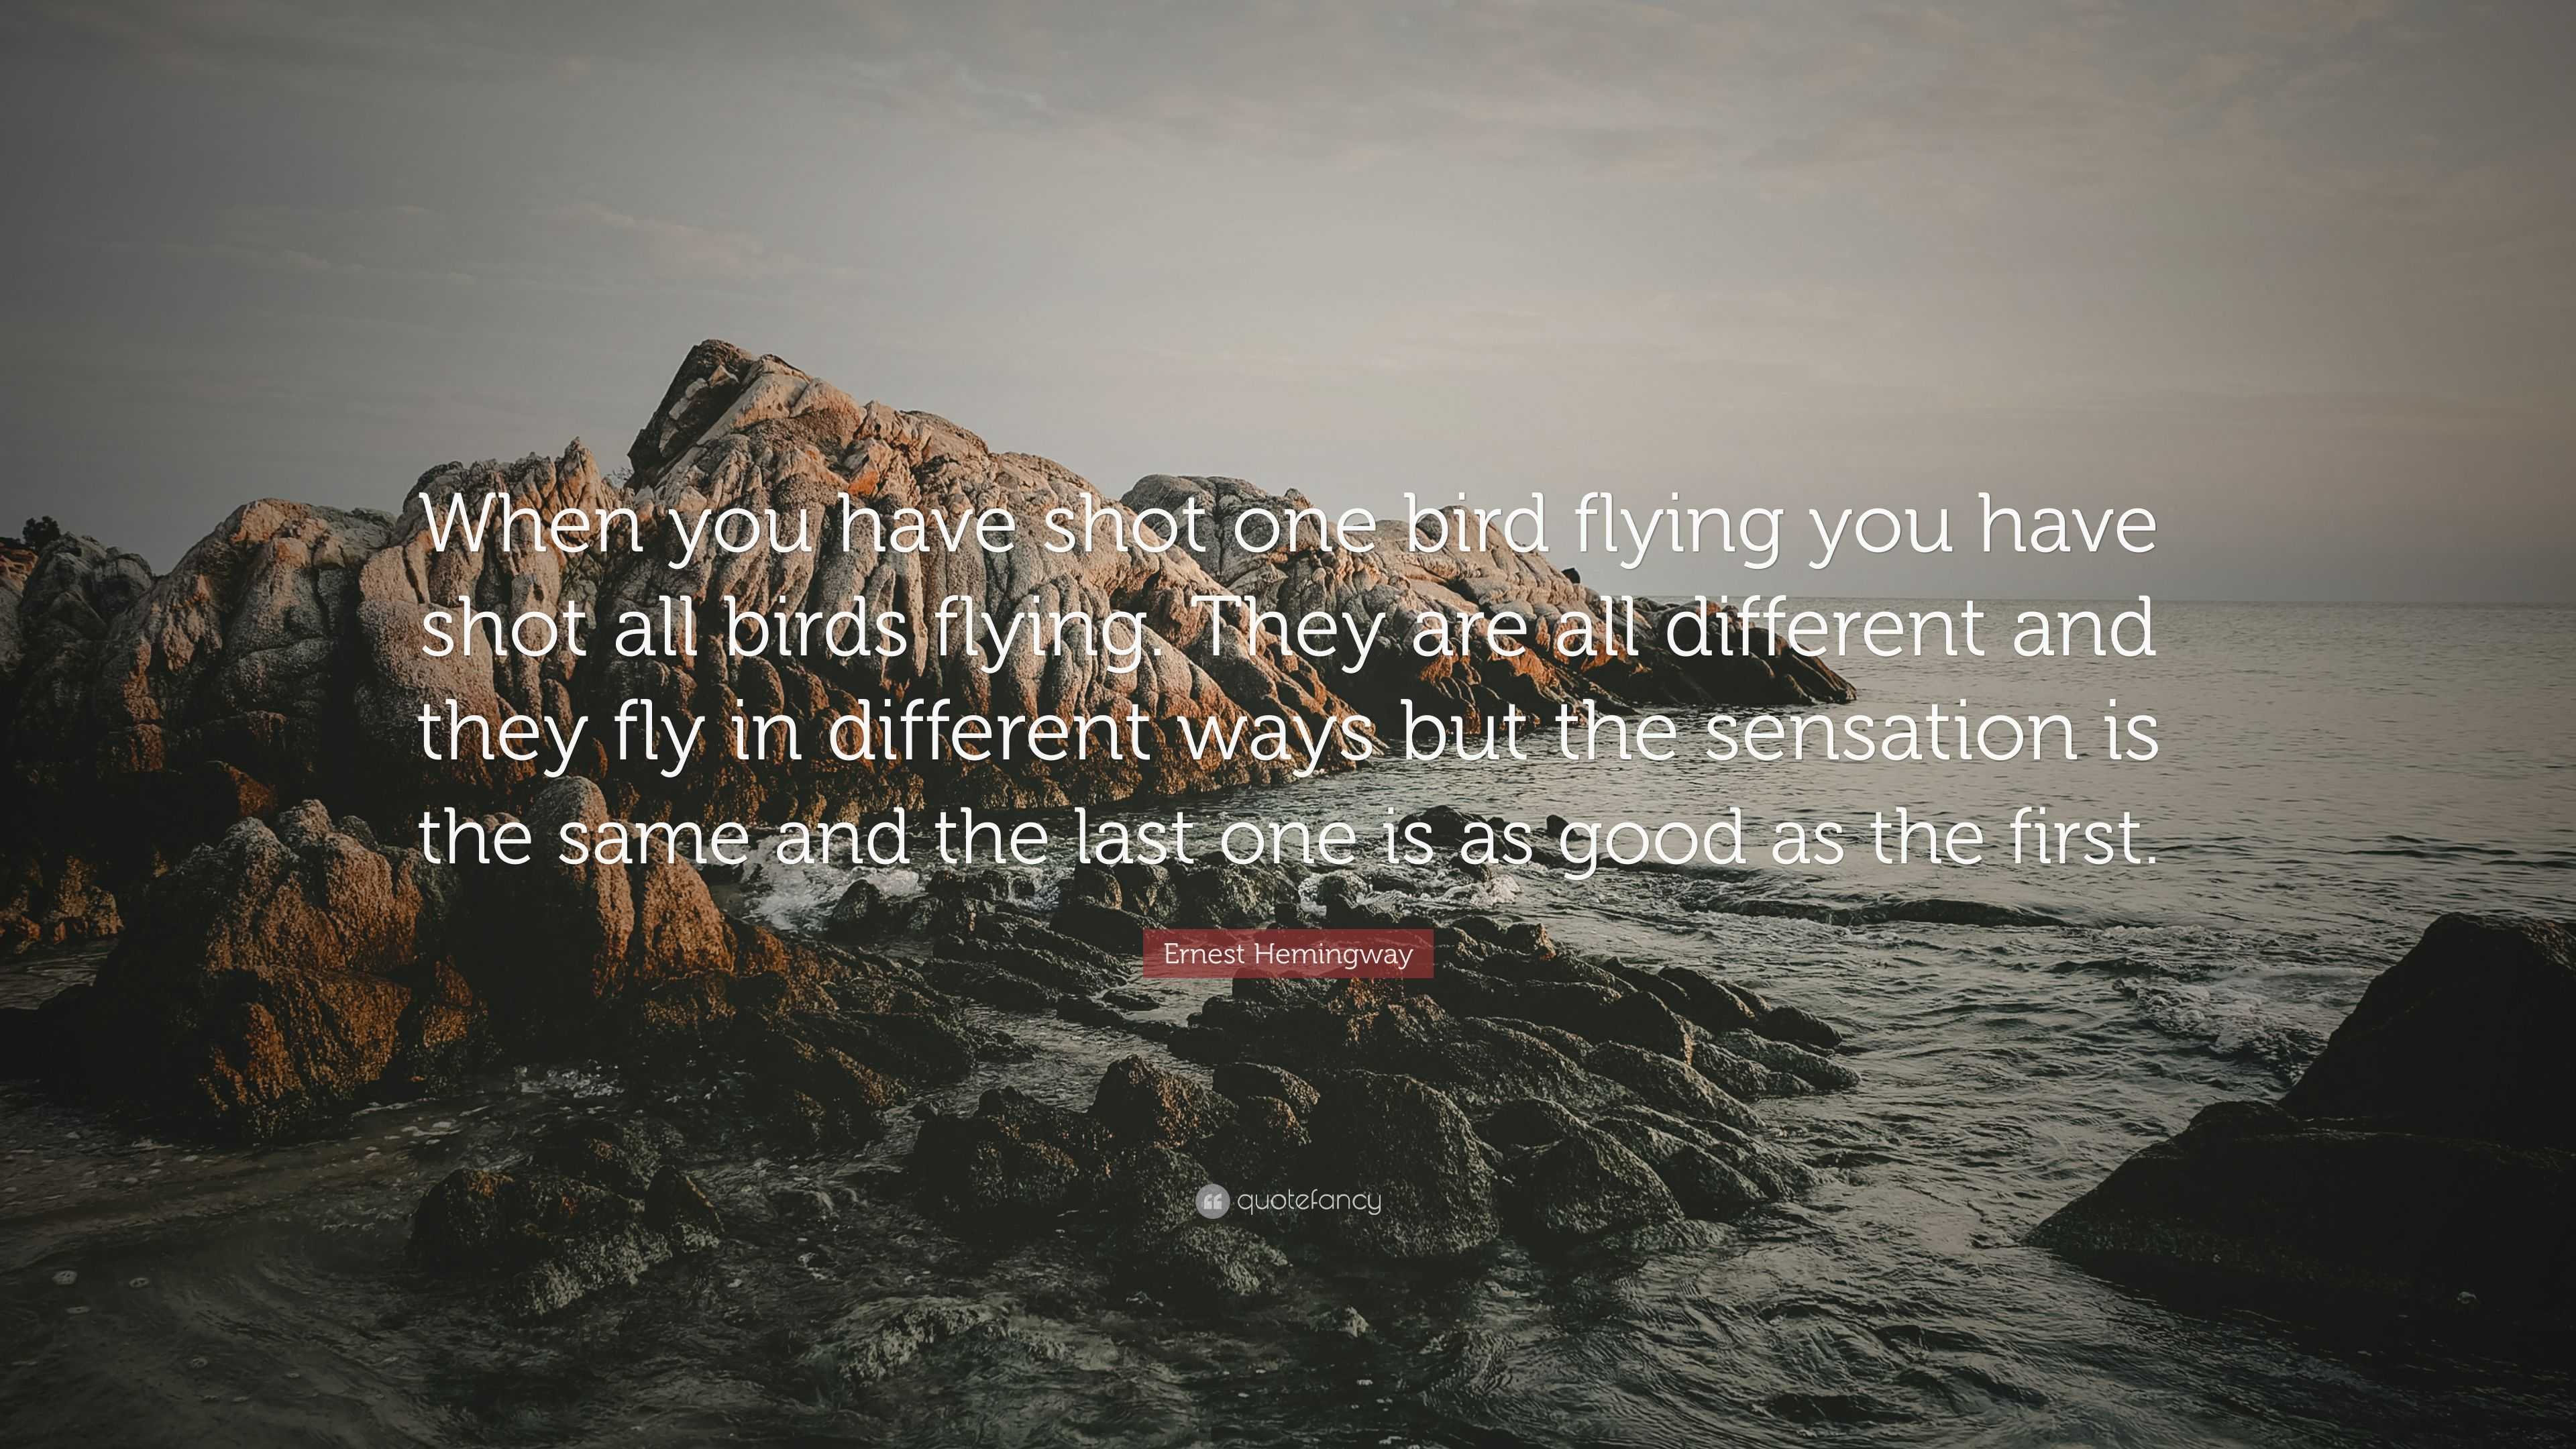 Ernest Hemingway Quote: “When you have shot one bird flying you have ...